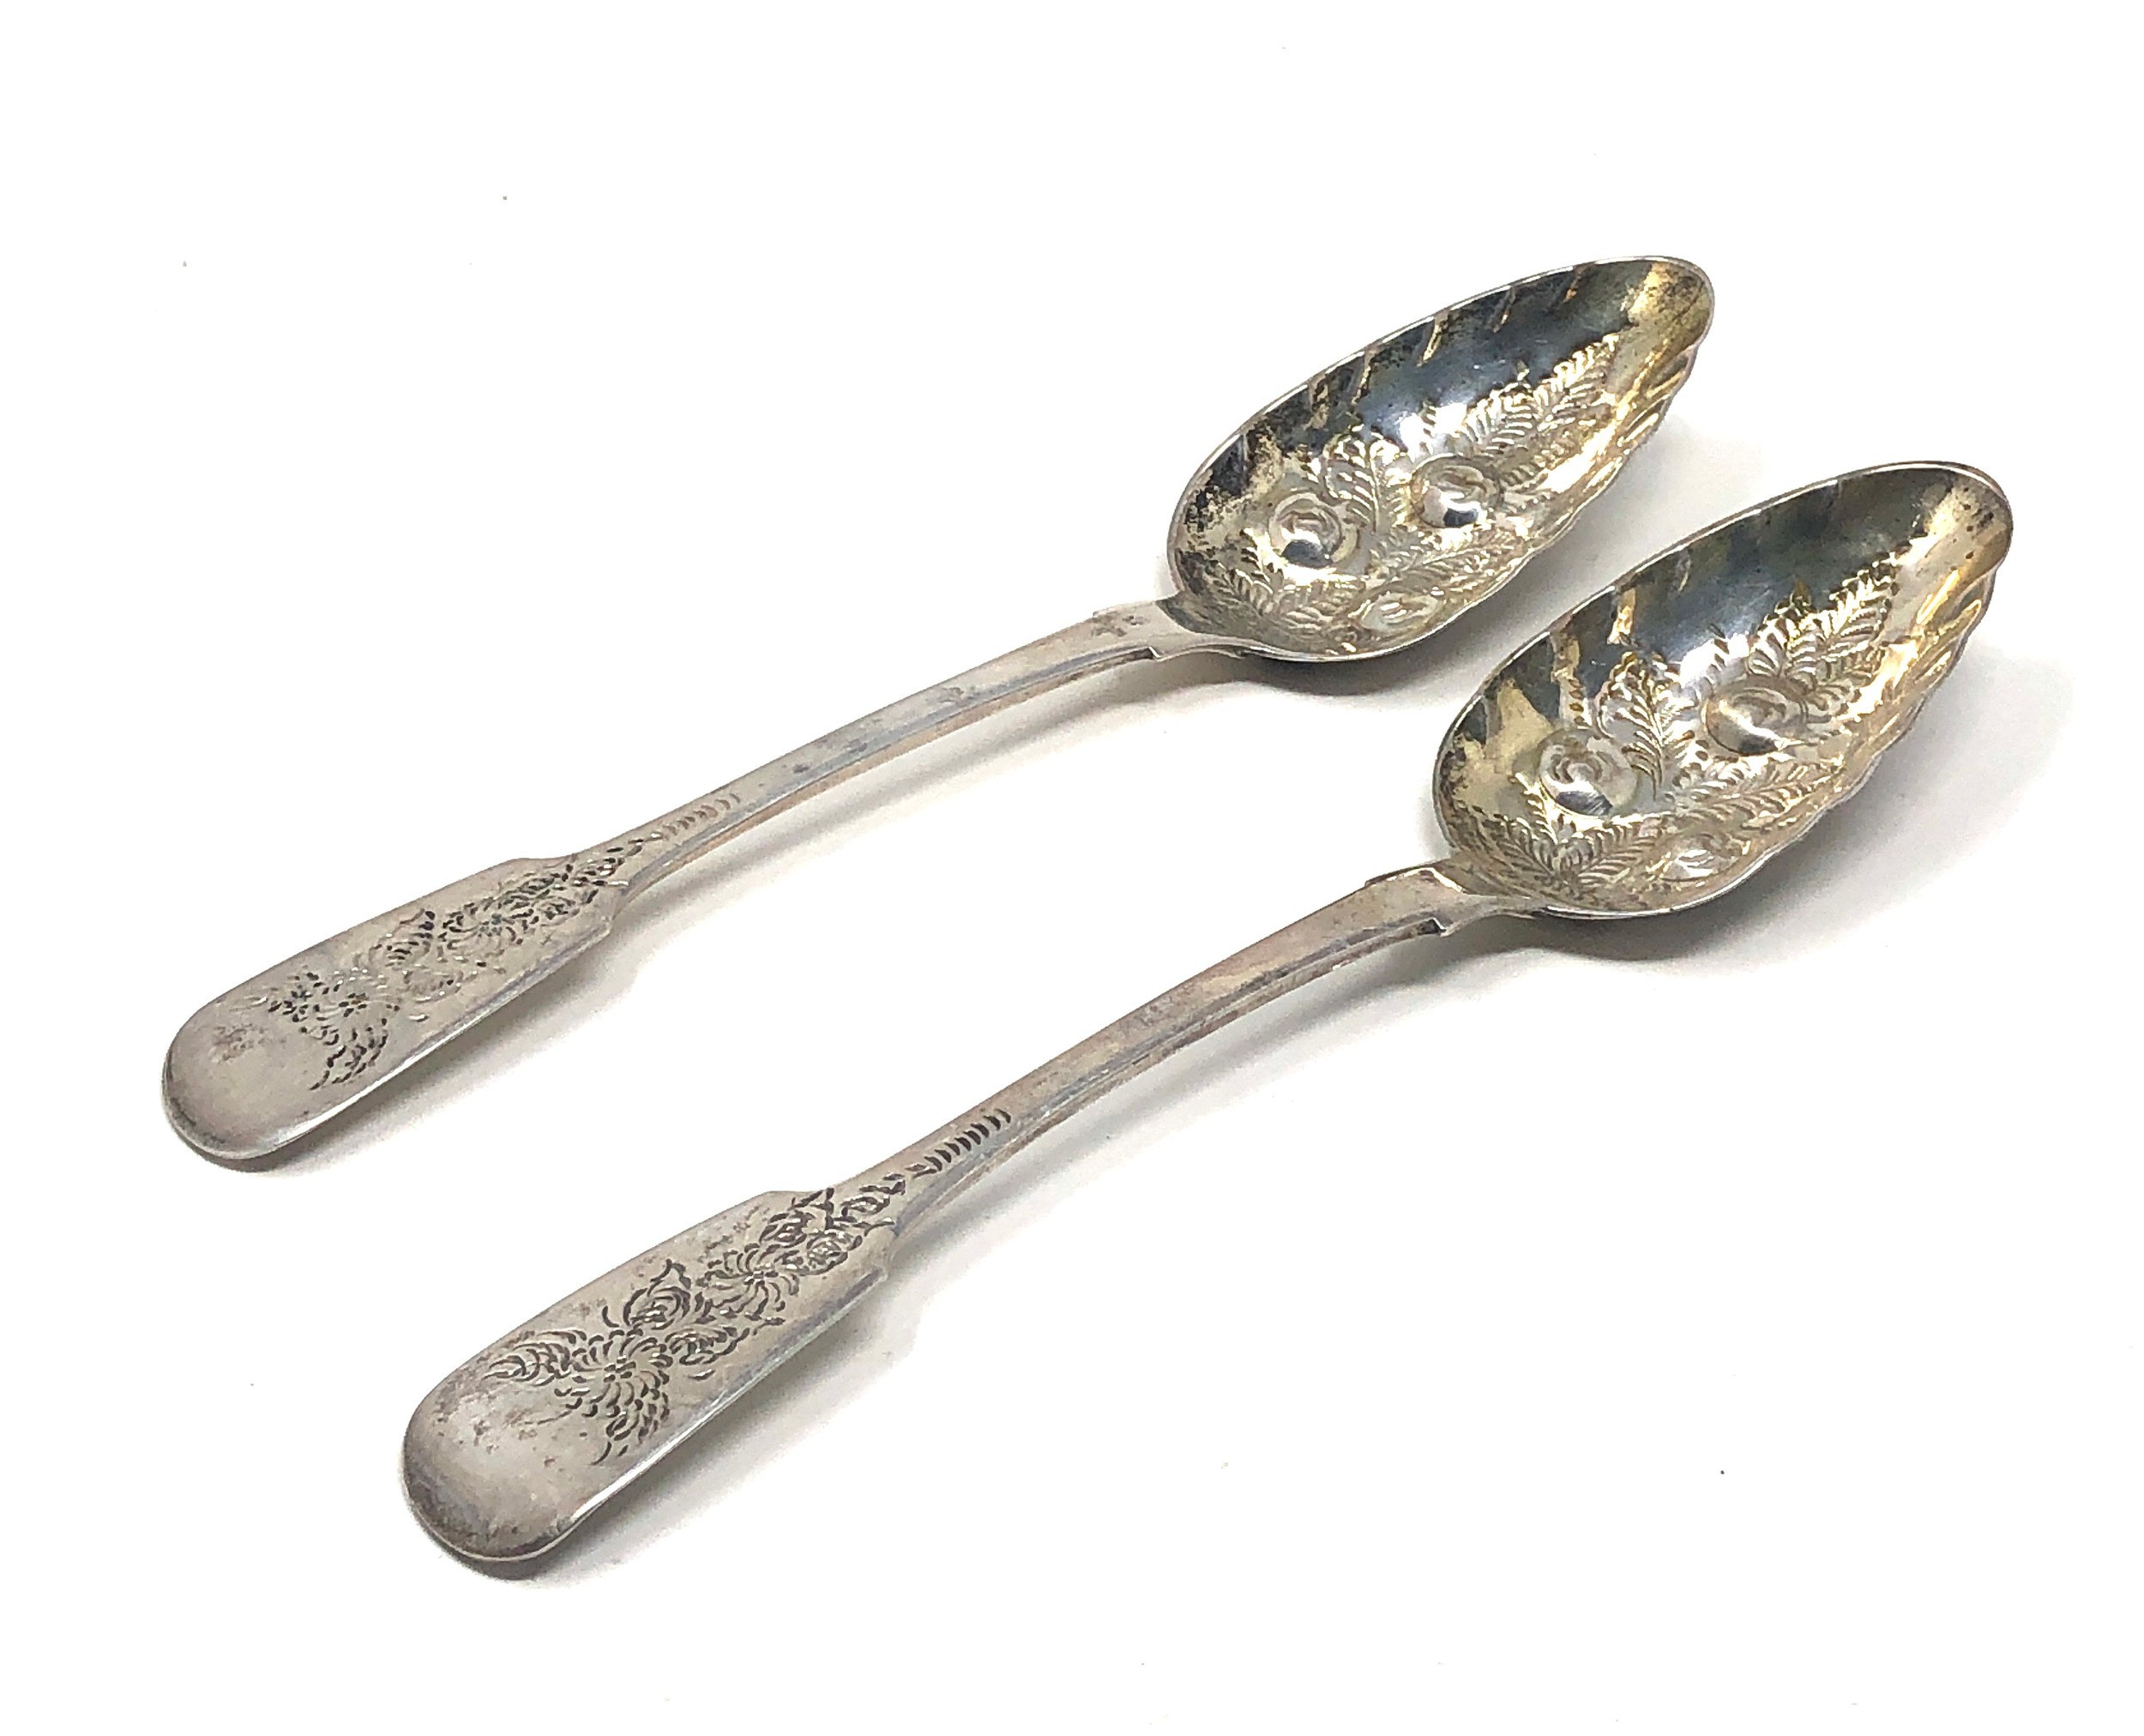 Pair of antique georgian silver berry spoons weight 120g - Image 3 of 5